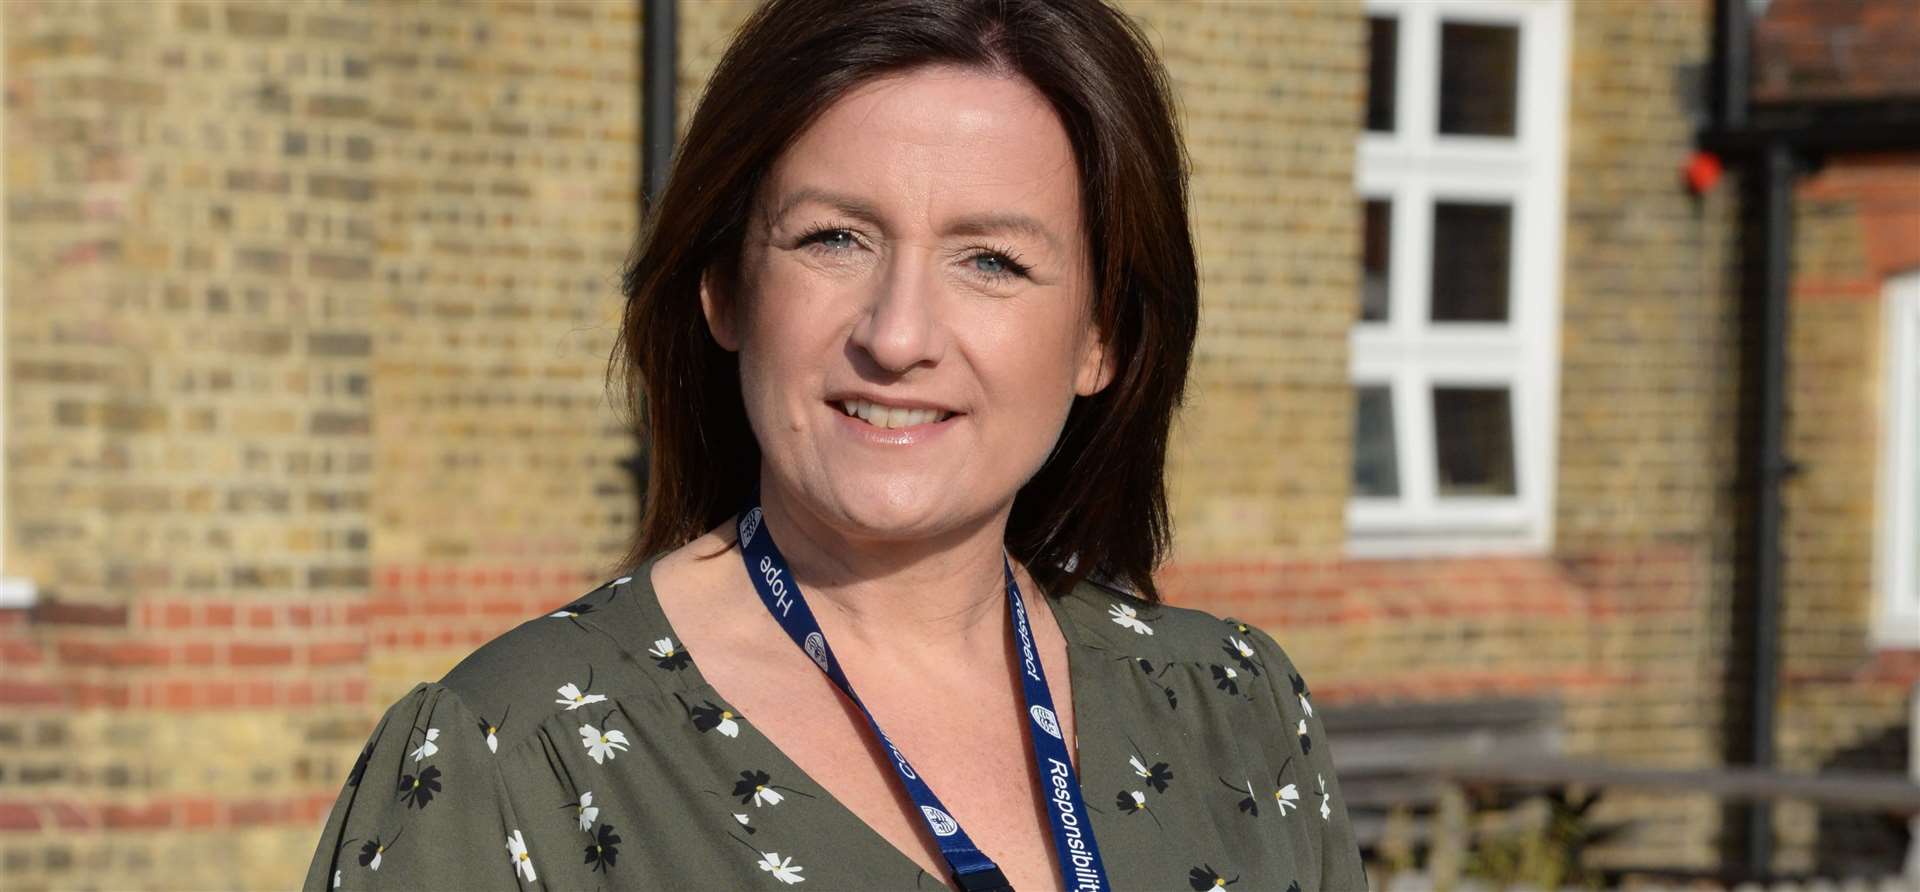 Melody Kingman, the new head at Herne Bay Junior School. Picture: Chris Davey. (26965796)